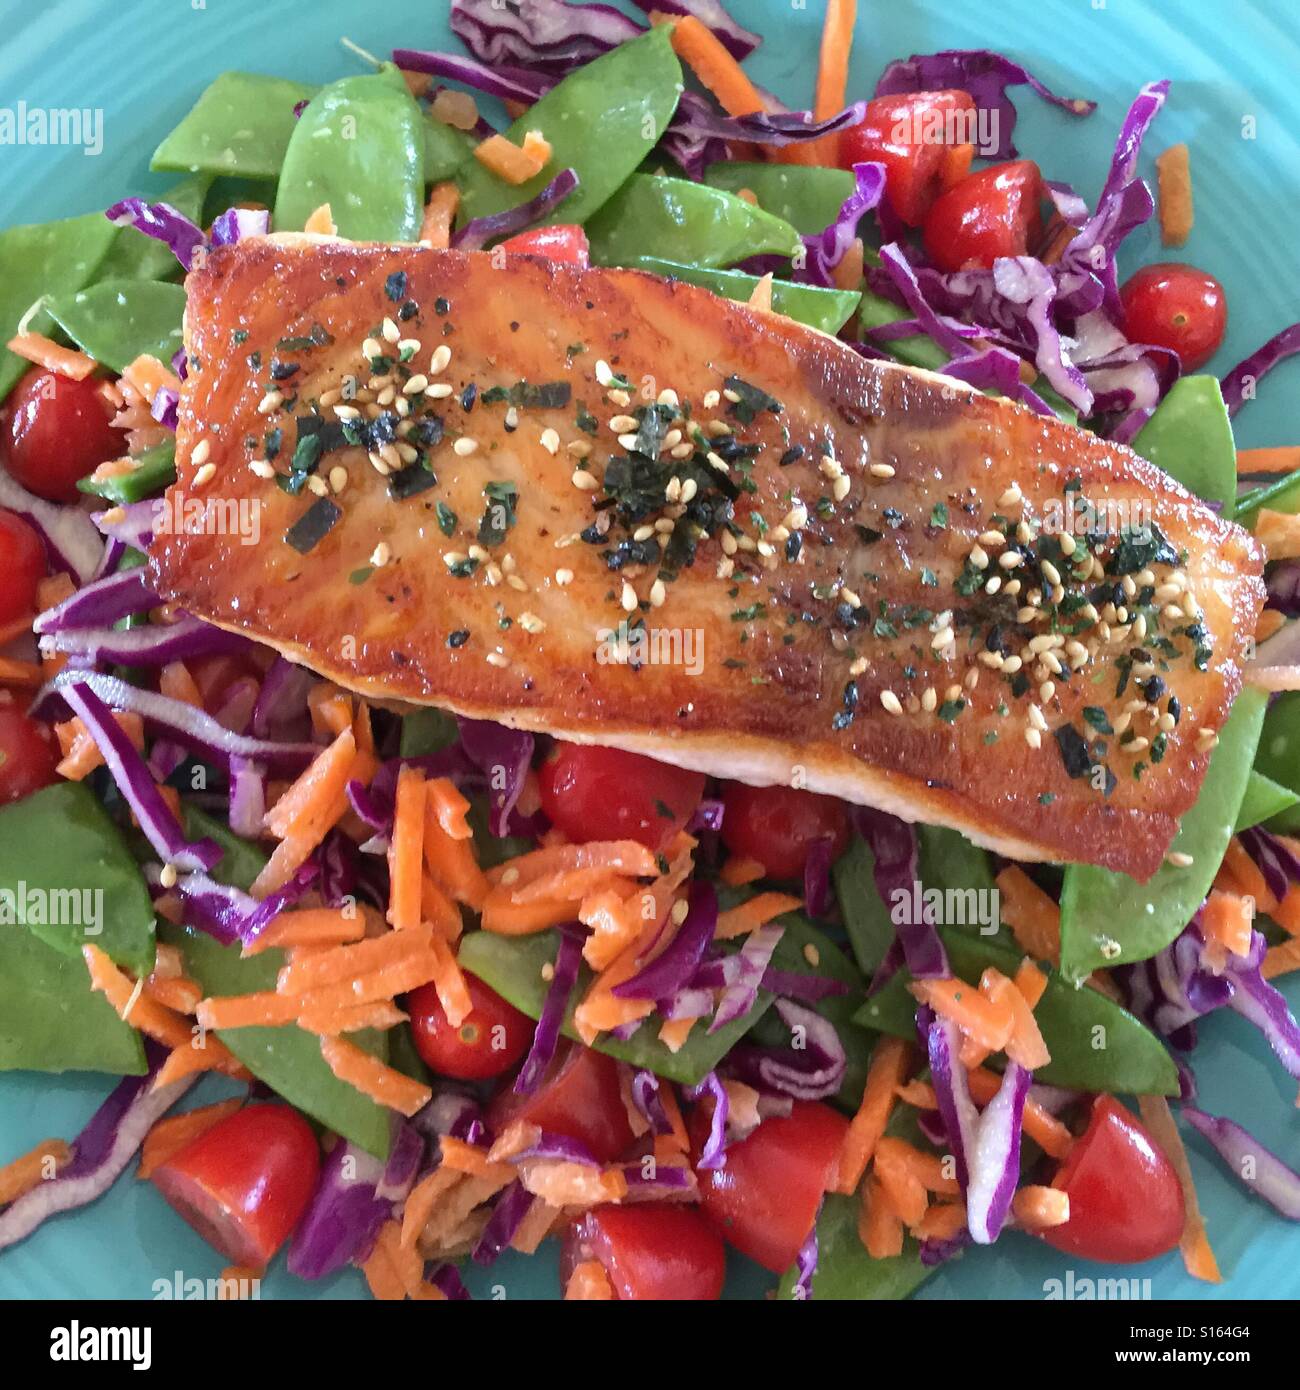 Healthy Dinner of Salmon and Salad Stock Photo